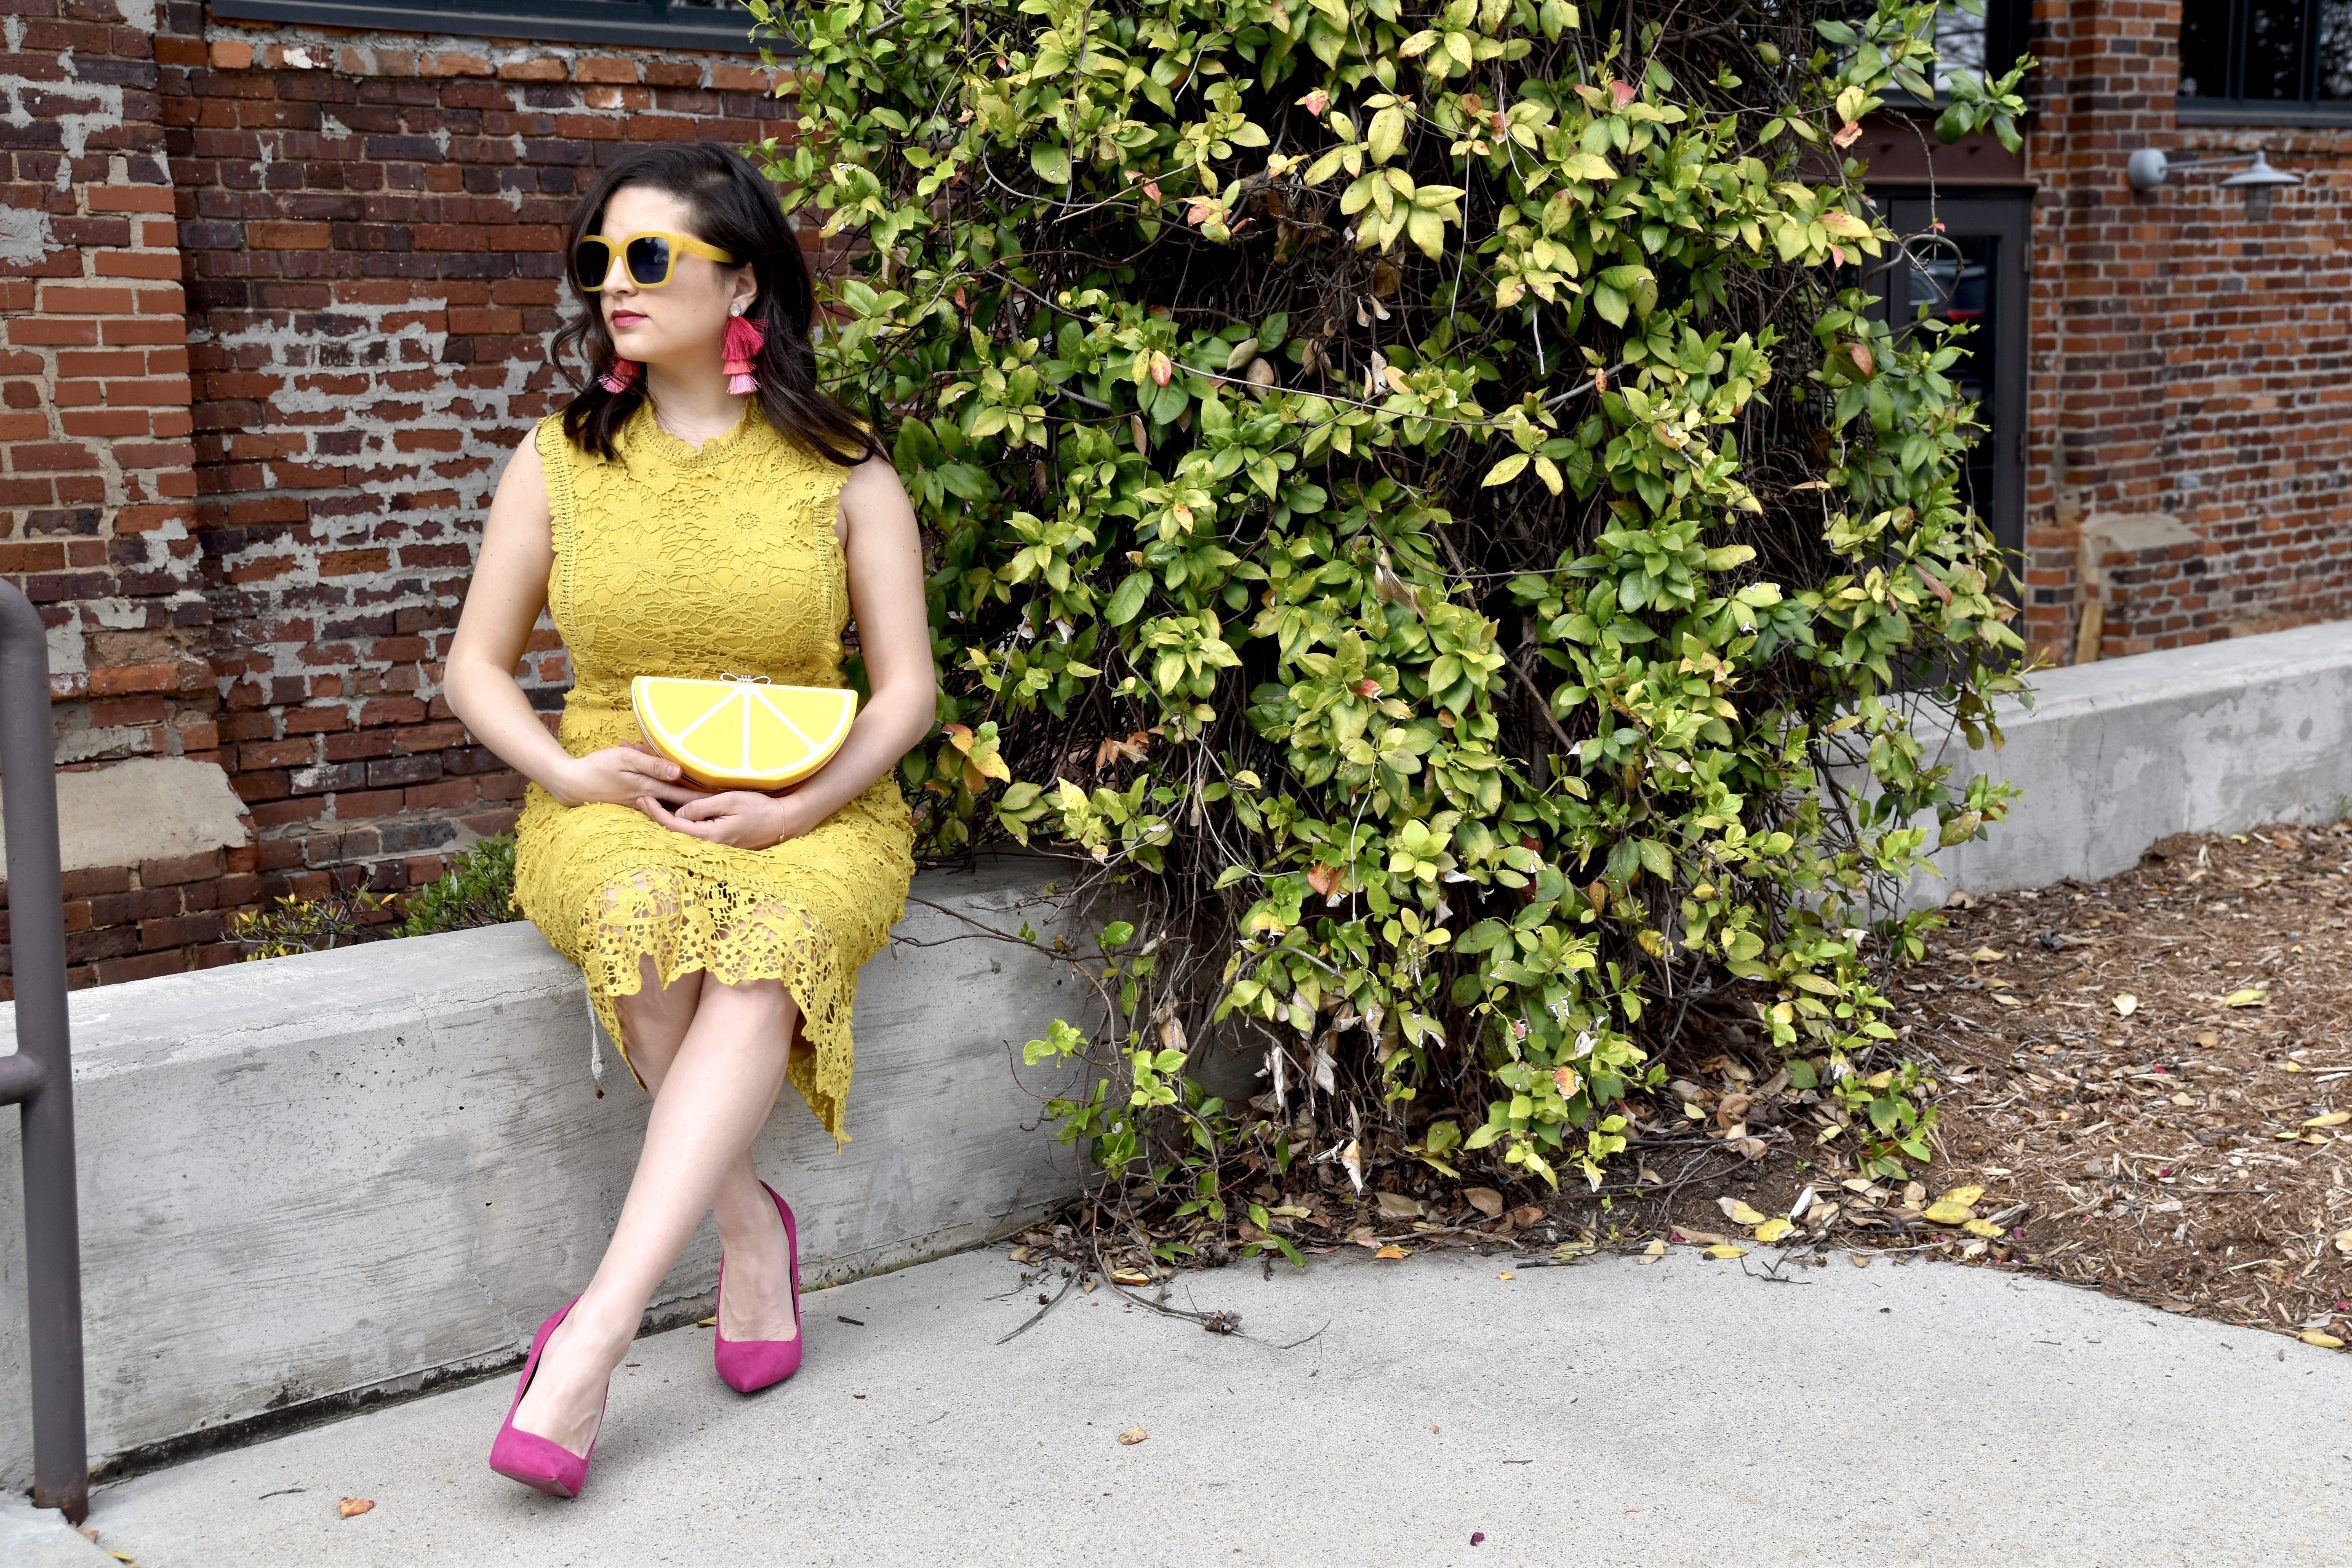 spring Boohoo yellow dress, suede pink pumps, and lemon clutch sitting